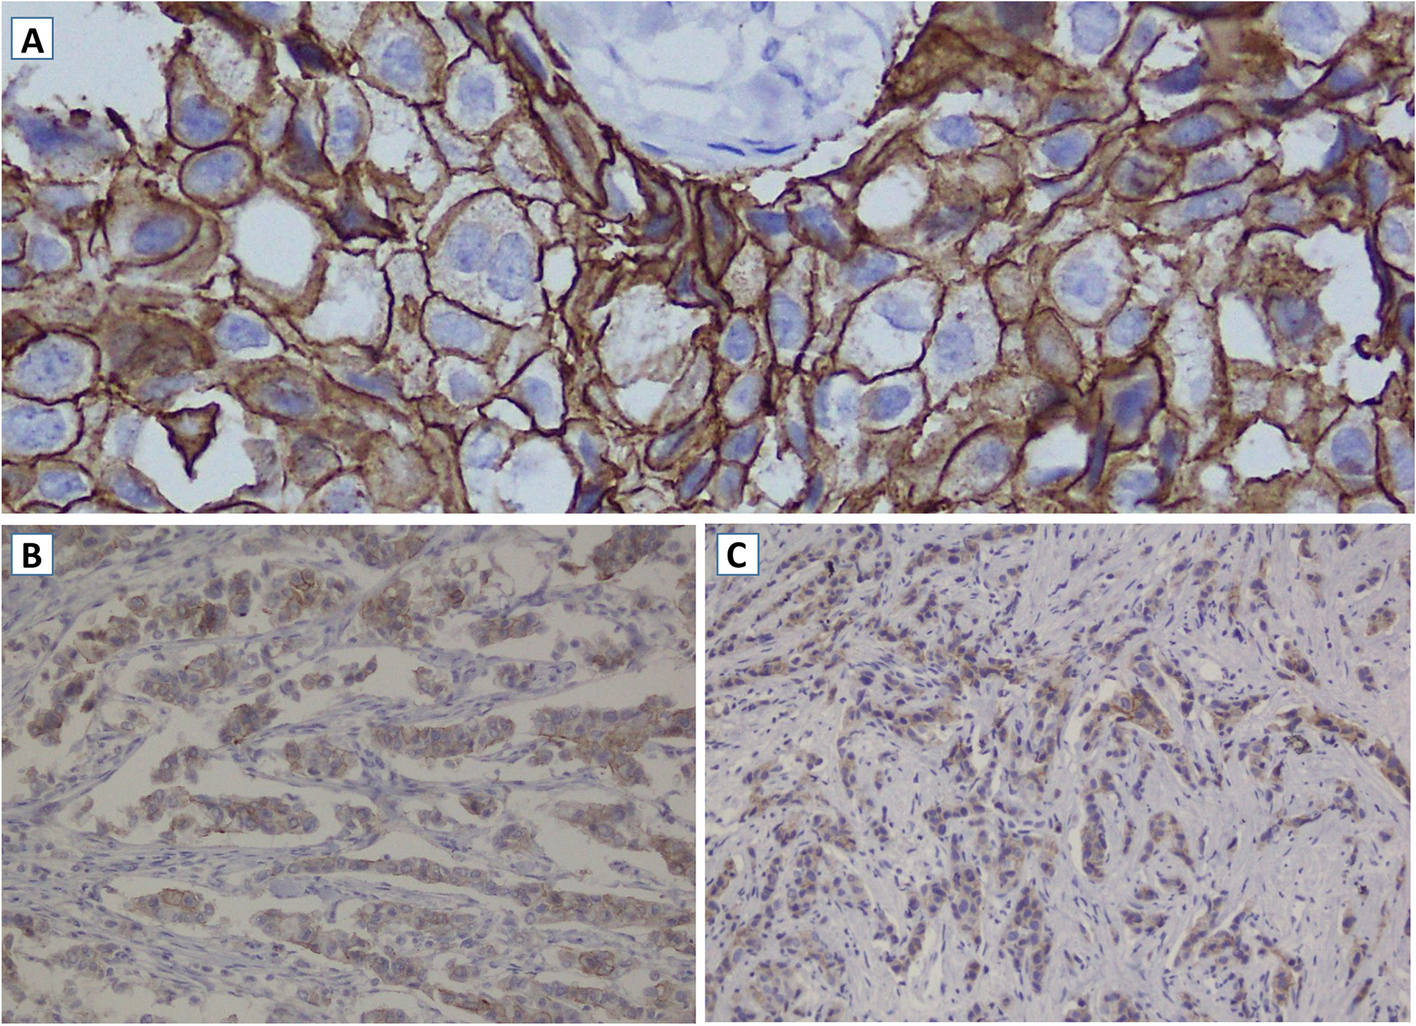 Association of hormone receptors and human epidermal growth factor receptor-2/neu expressions with clinicopathologic factors of breast carcinoma: a cross-sectional study in a tertiary care hospital, Kabul, Afghanistan